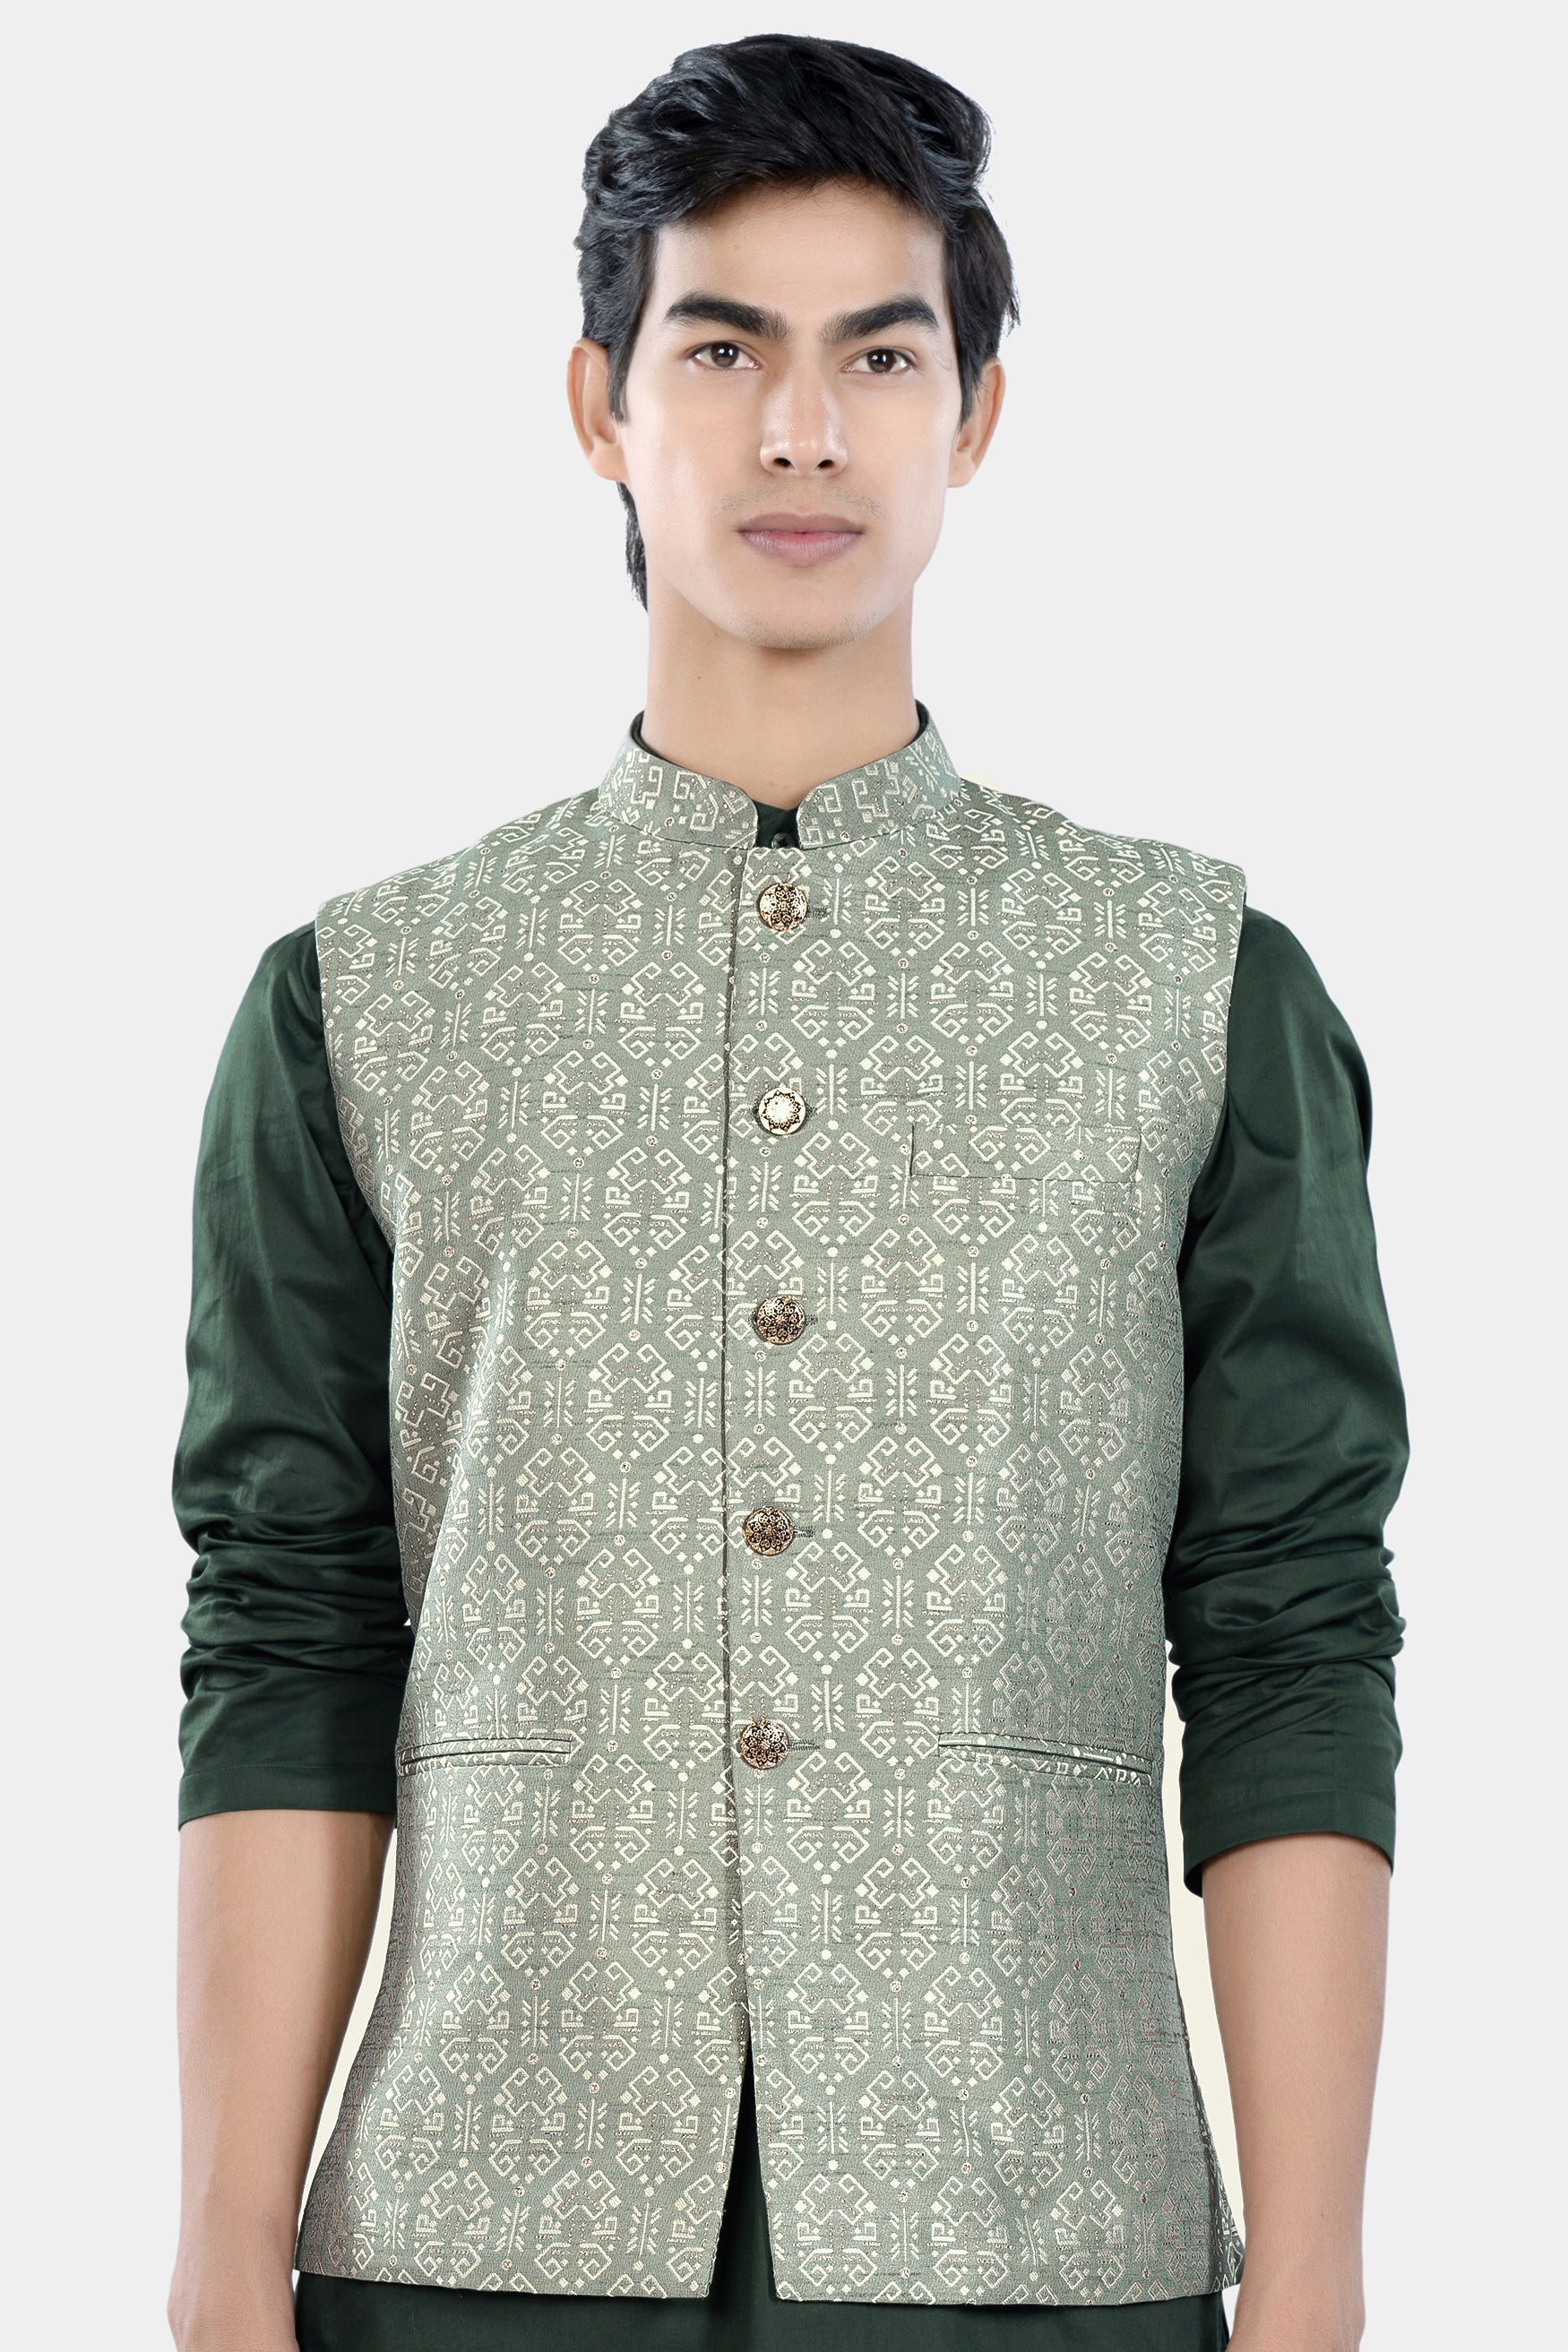 Pumice Green and White Jacquard Textured Designer Nehru Jacket WC3455-36,  WC3455-38,  WC3455-40,  WC3455-42,  WC3455-44,  WC3455-46,  WC3455-48,  WC3455-50,  WC3455-52,  WC3455-54,  WC3455-56,  WC3455-58,  WC3455-60